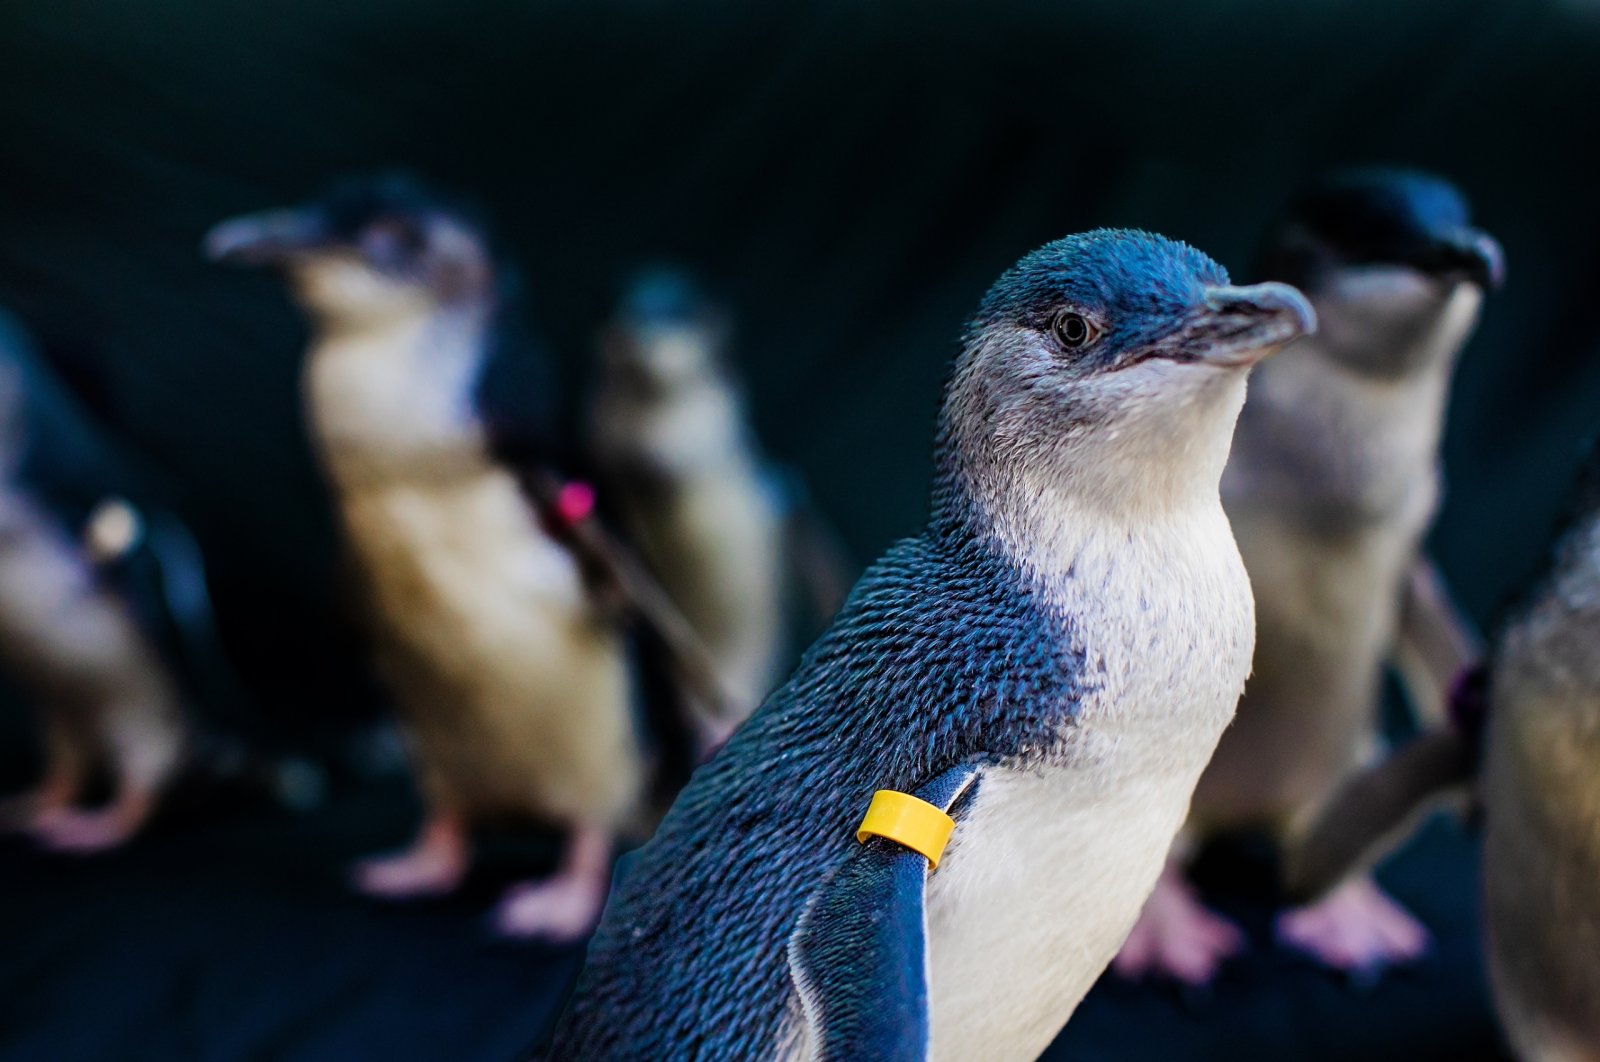 Holidaymakers in California can see a new &quot;Beyster Family Little Blue Penguins&quot; exhibition featuring the world&#039;s smallest penguins at the Birch Aquarium at Scripps in San Diego, U.S., April 12, 2022. (DPA Photo)